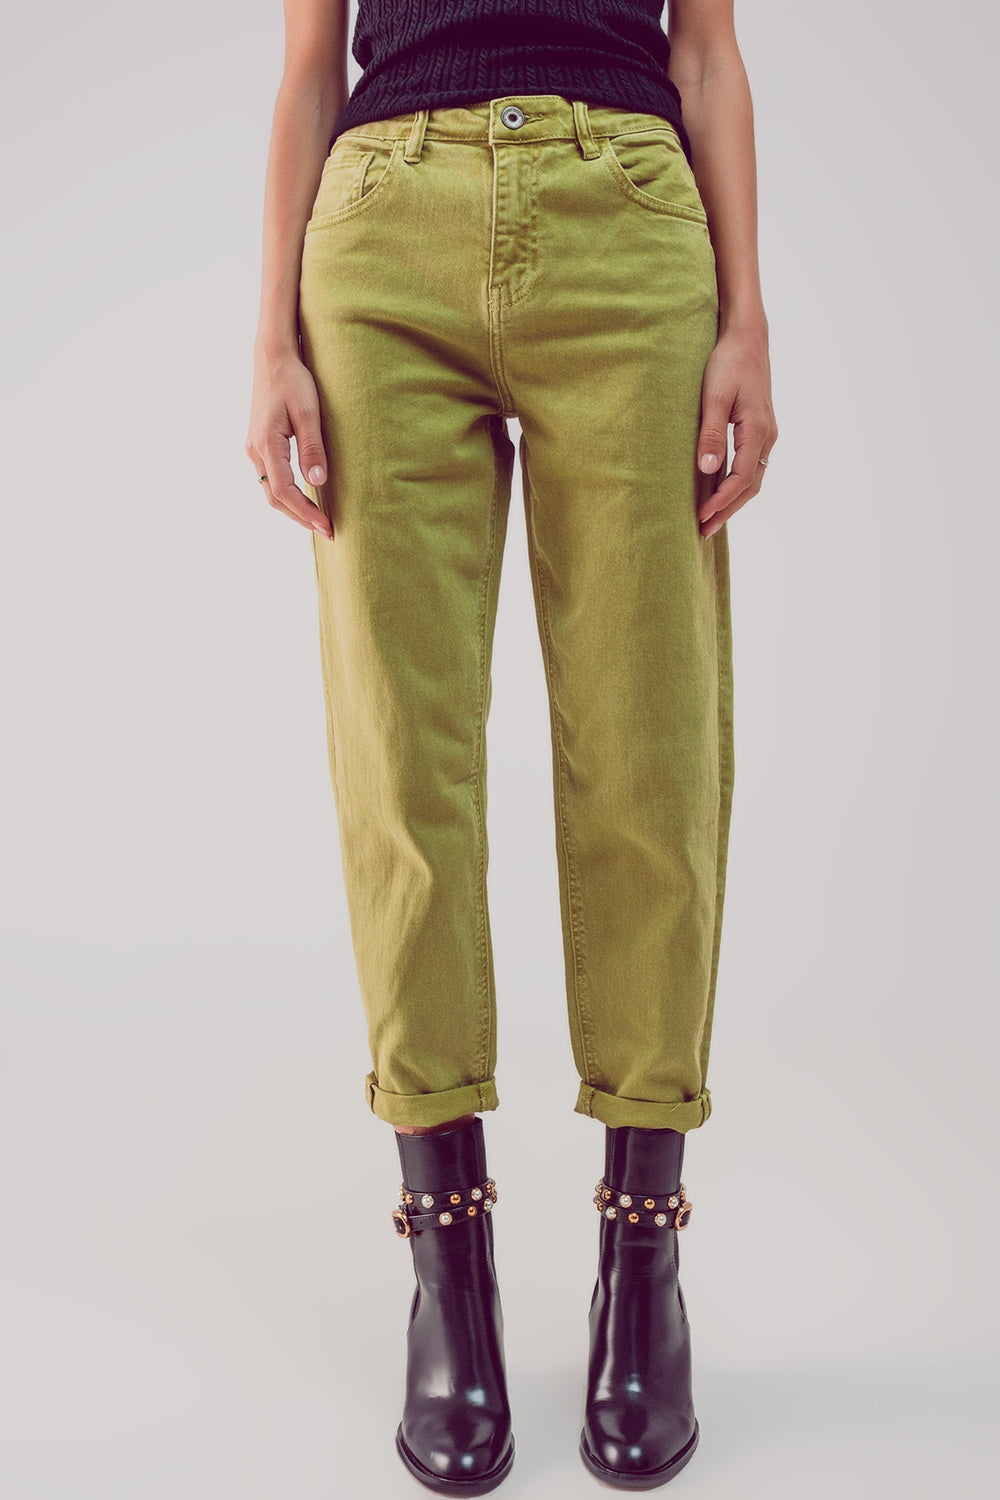 Q2 Cotton mid rise slouchy jean in acid lime